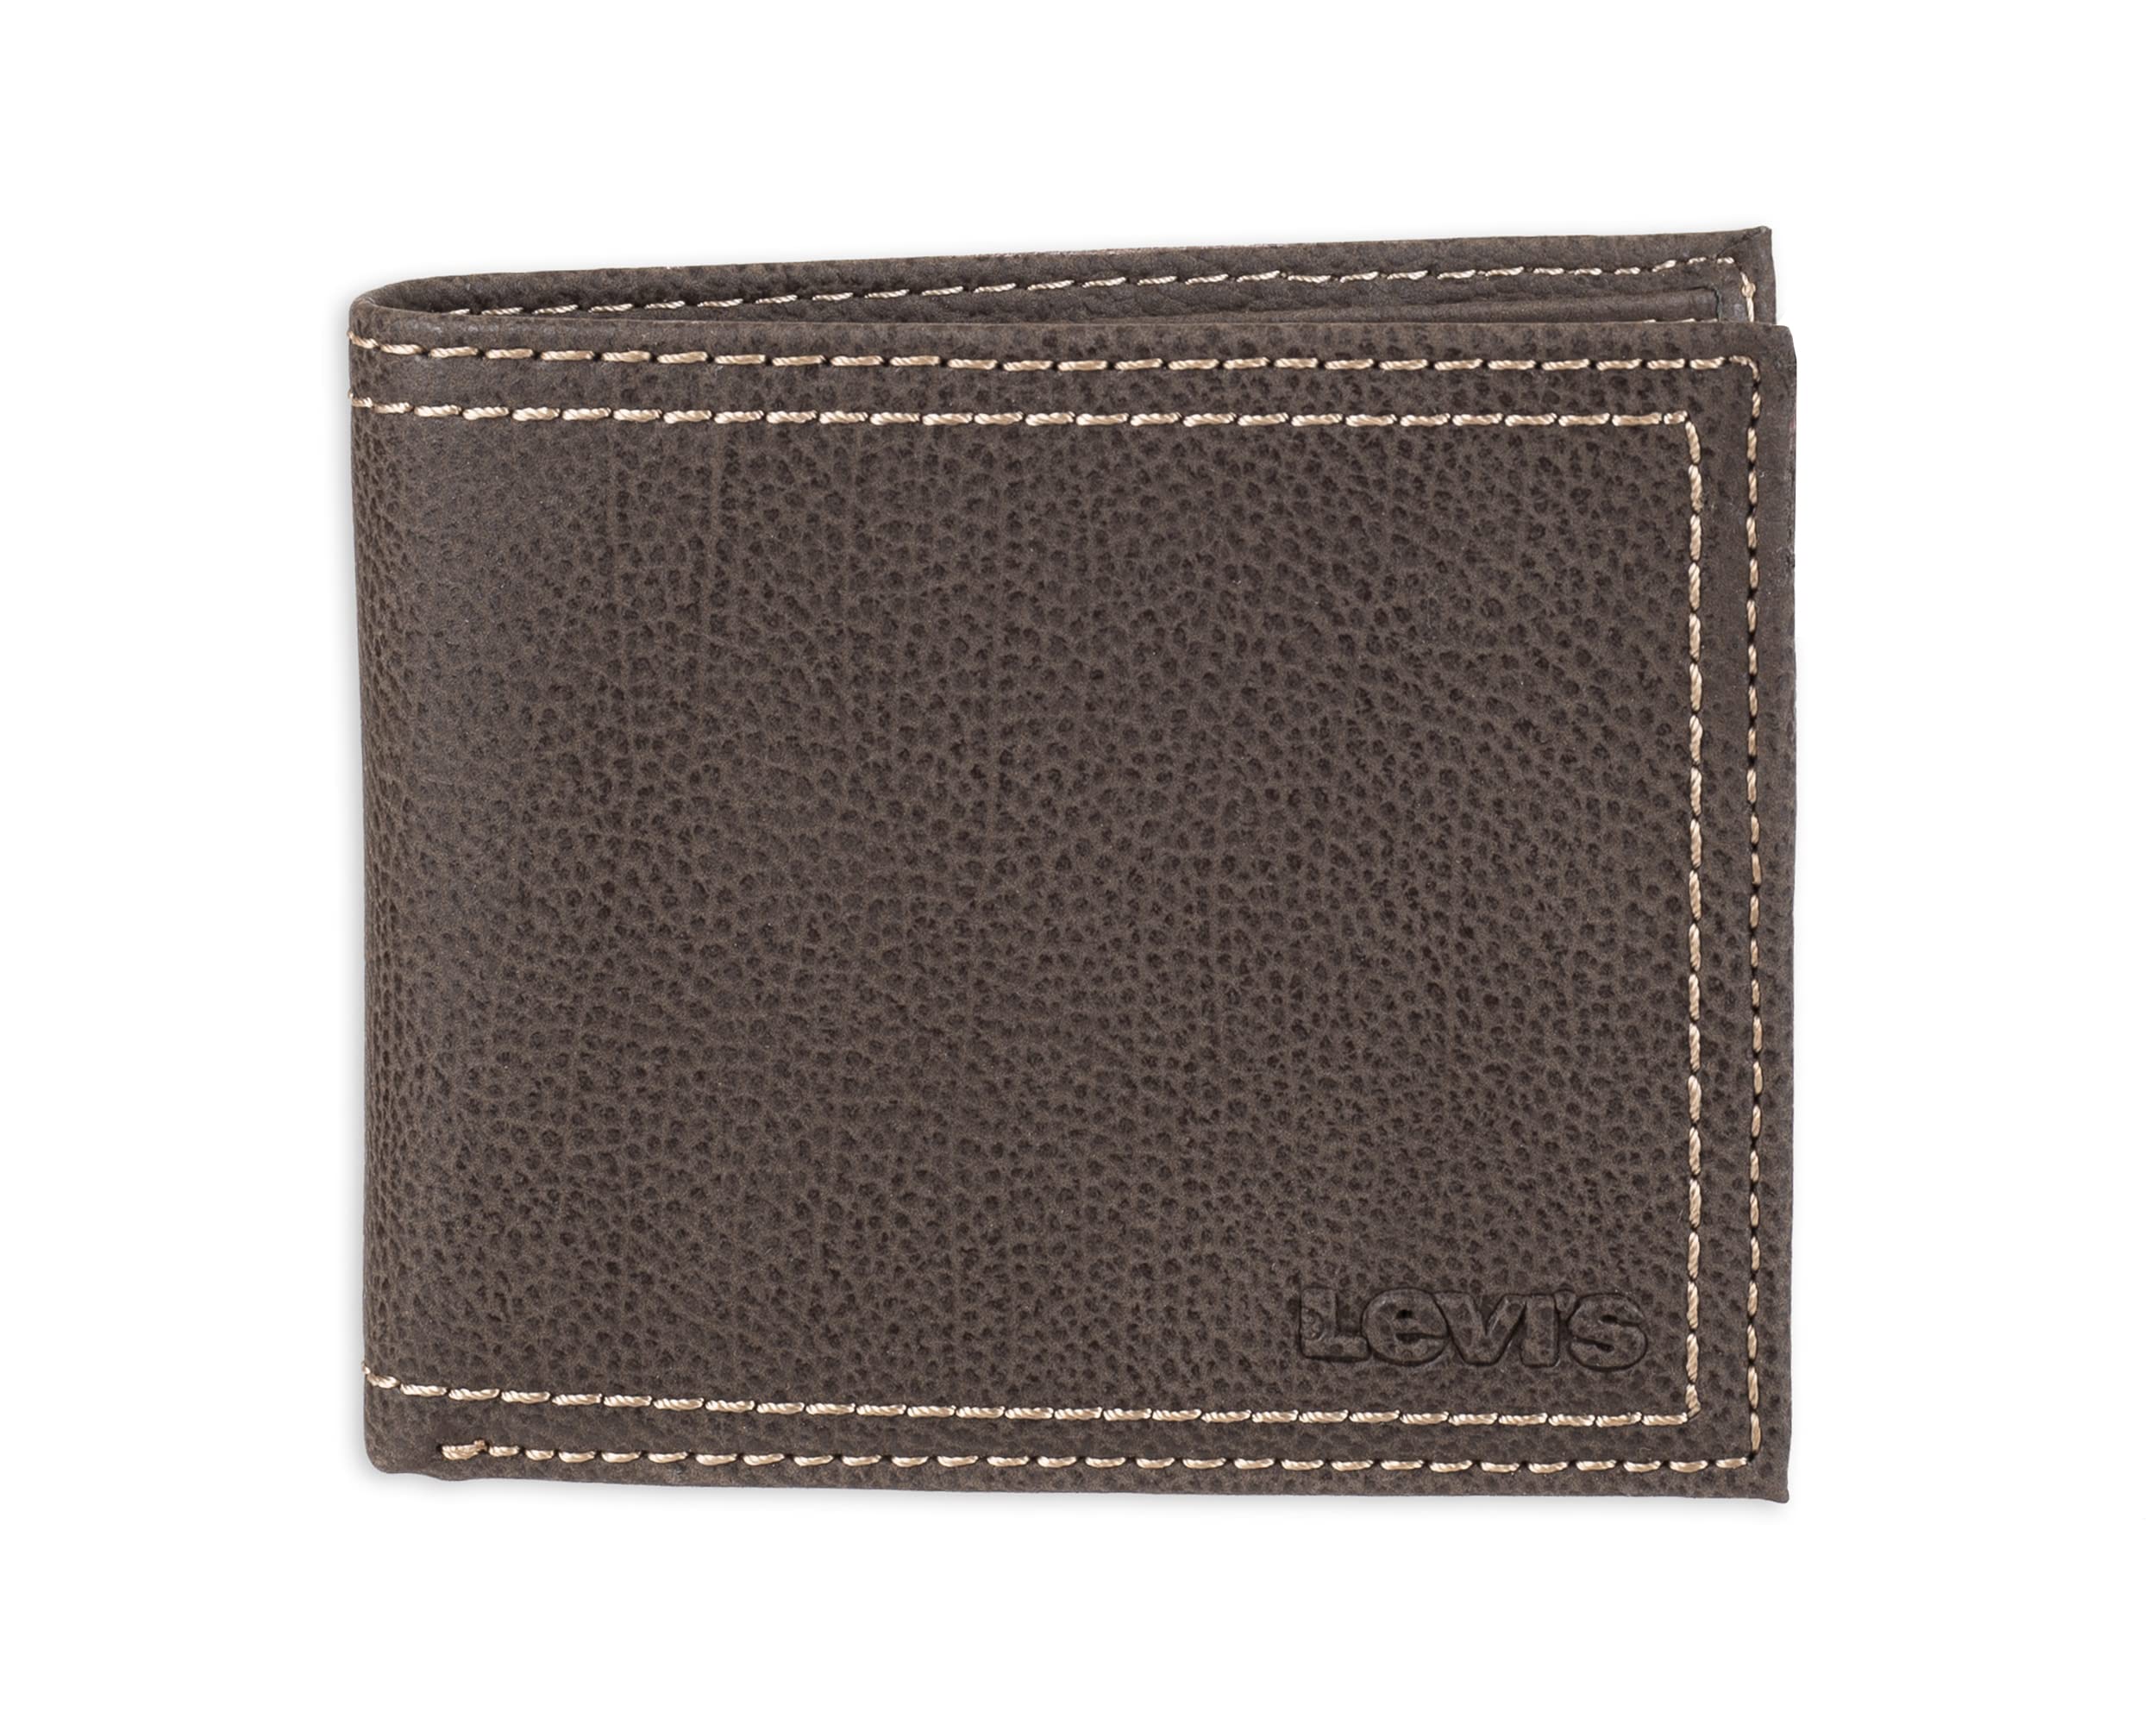 Levi's Men's Extra Capacity Slim Bifold Wallet (Brown) $15 + Free Shipping w/ Prime or on $35+